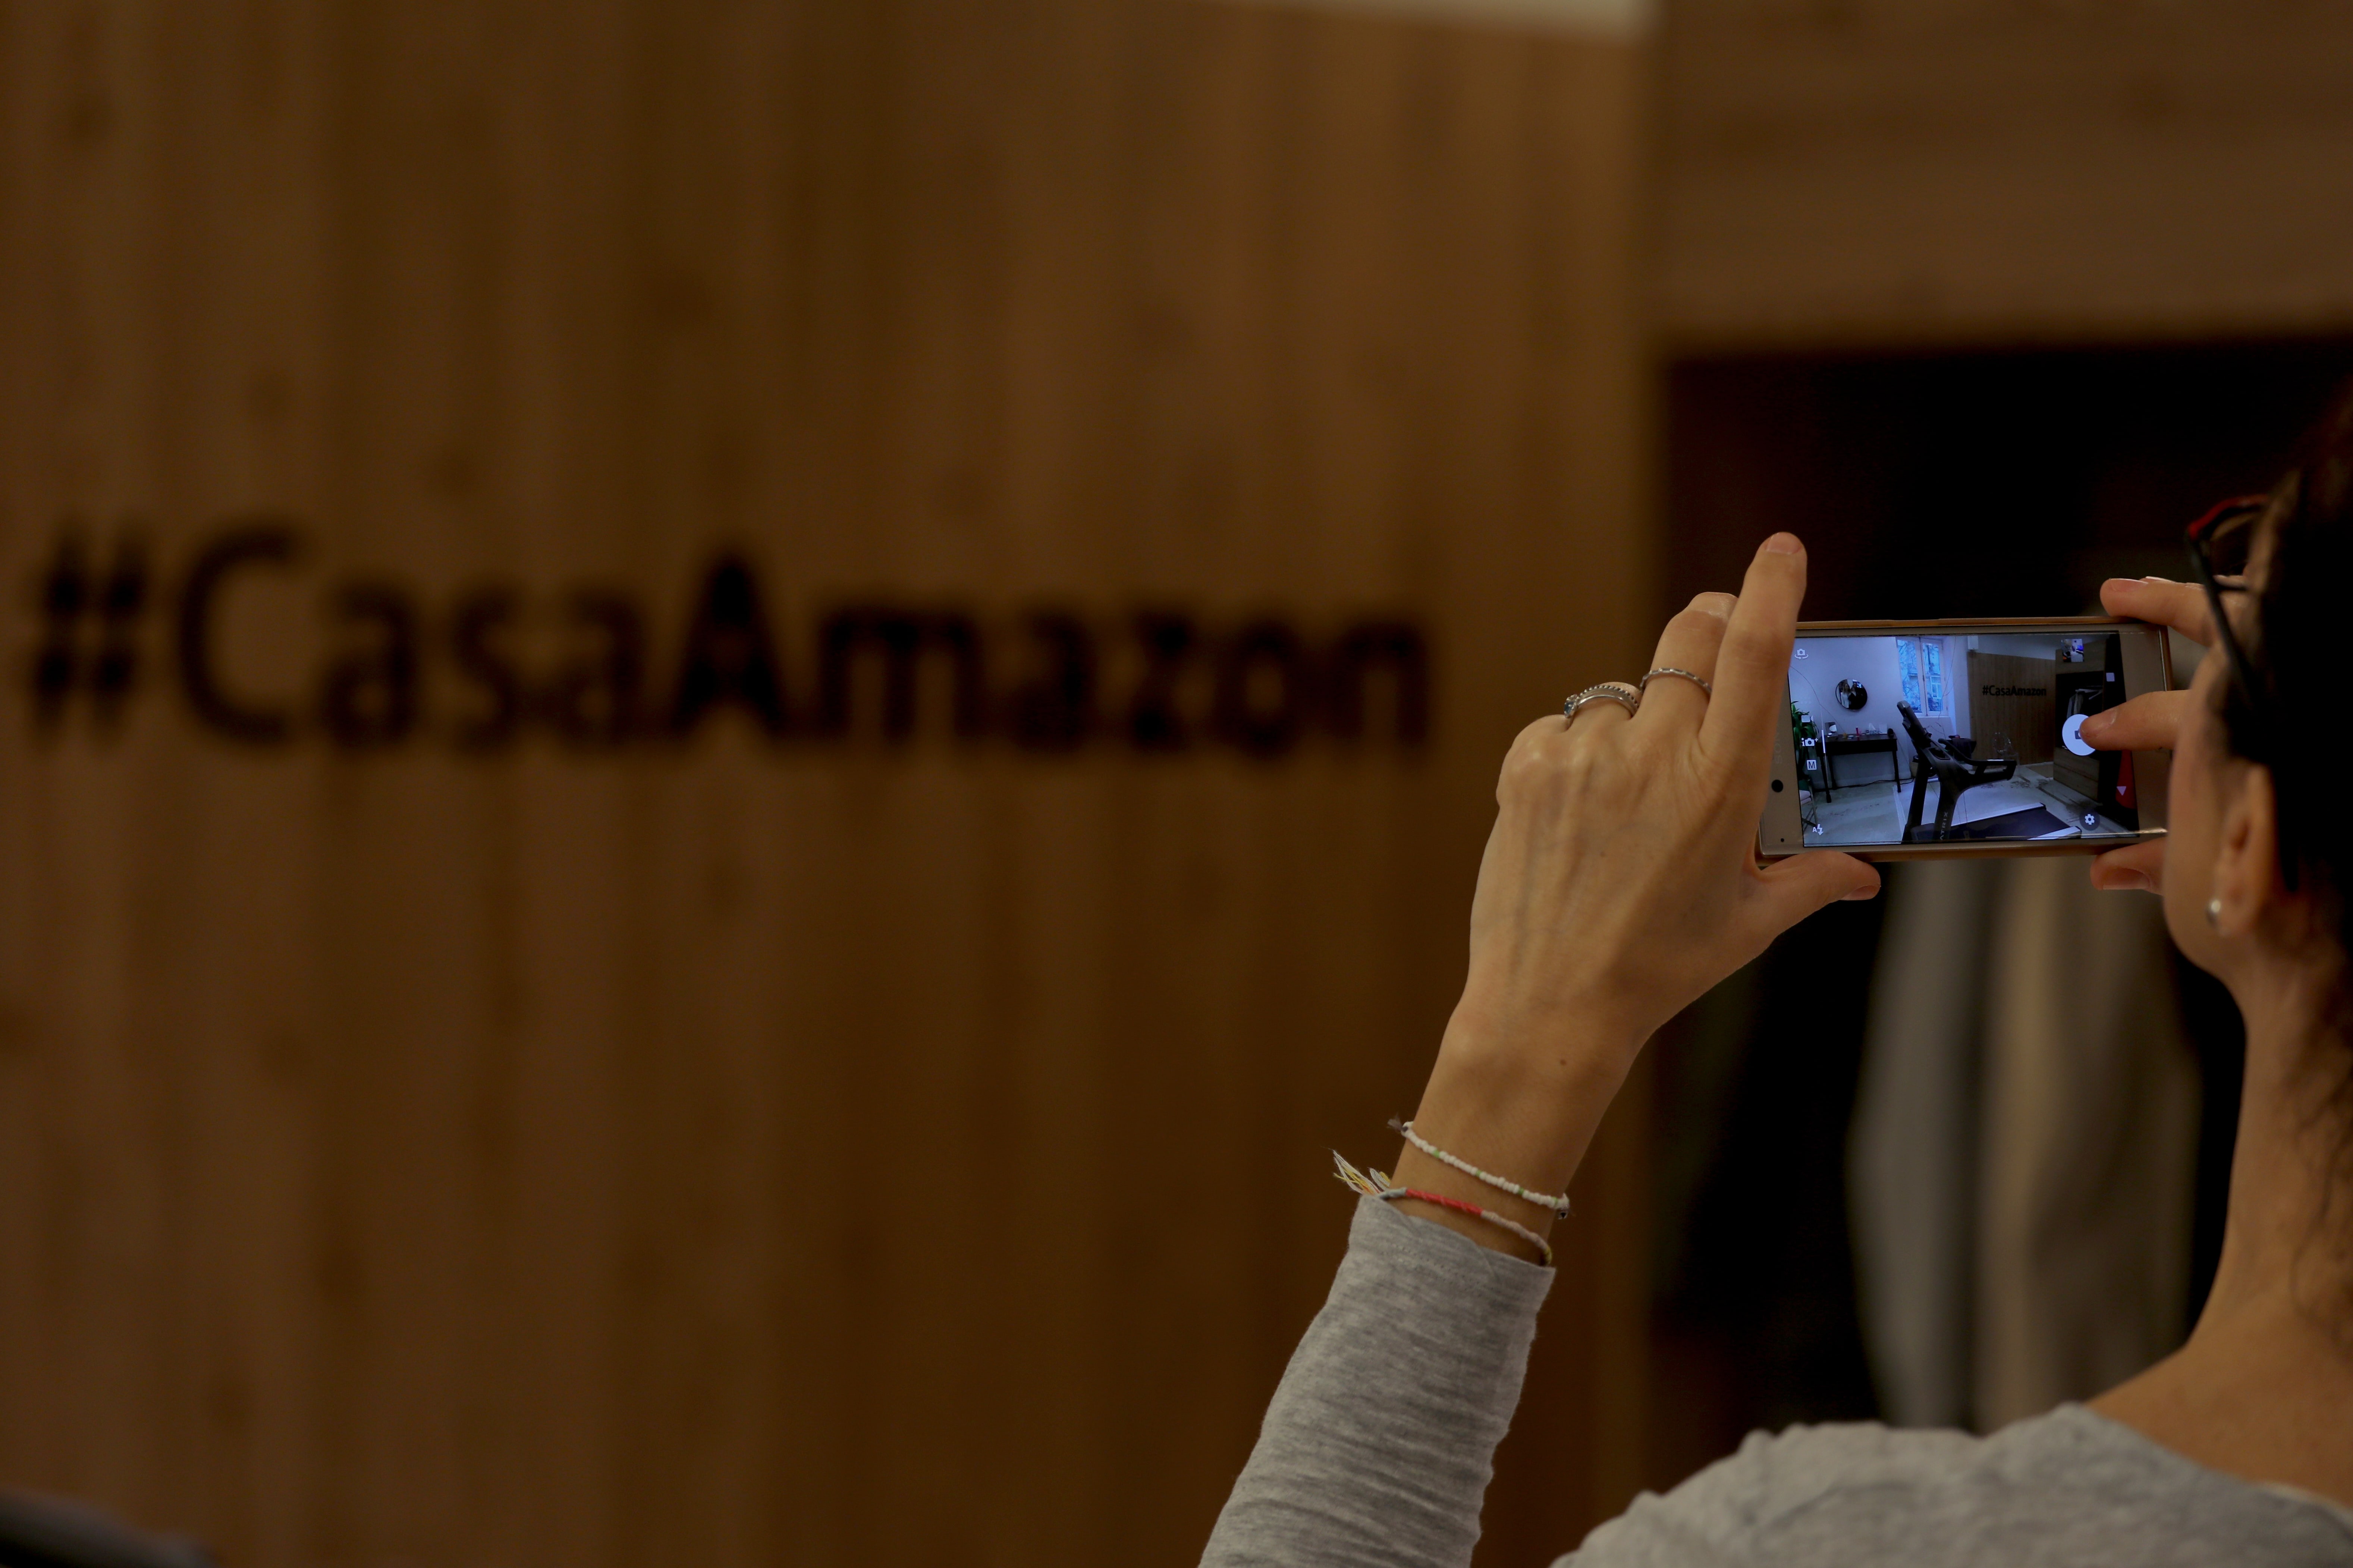 Amazon Spent $1.7 Billion on Video and Music in Q1